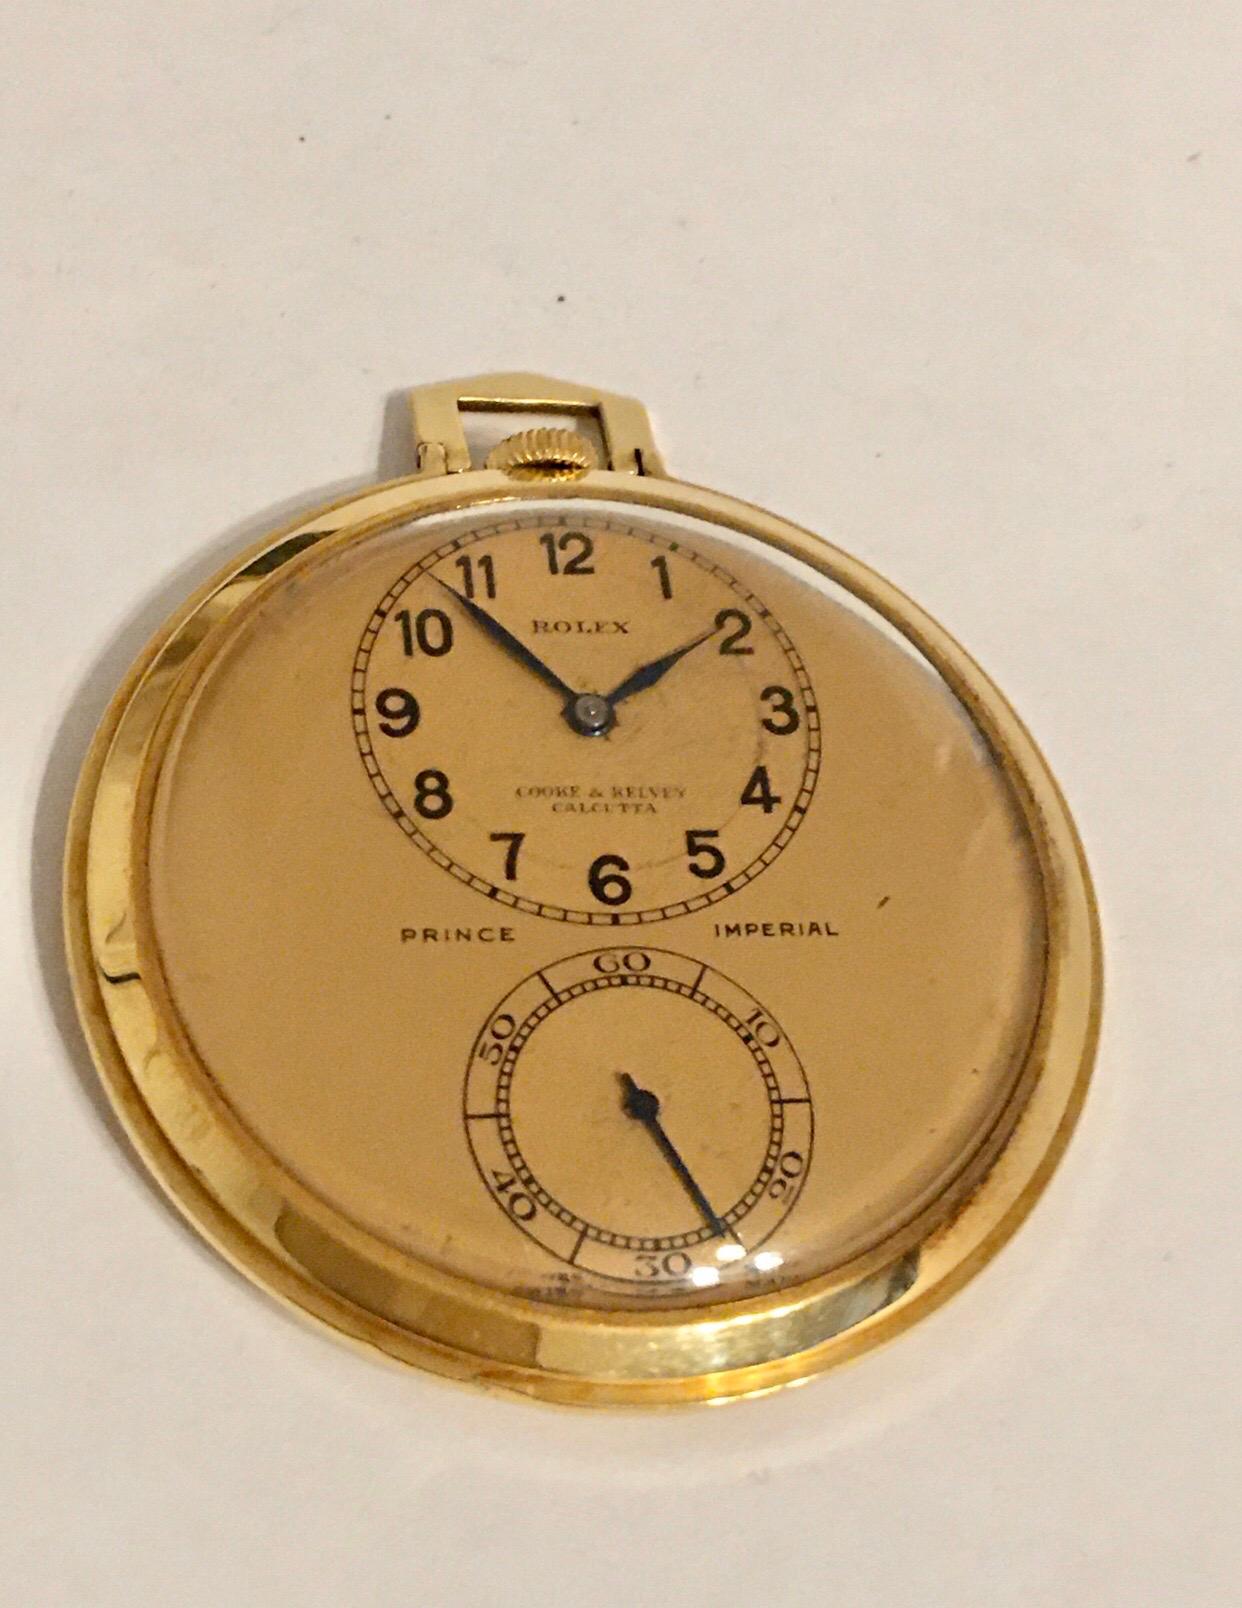 Rare 18k Gold Rolex Observatory Prince Imperial Dress Pocket Watch, circa 1950s For Sale 1